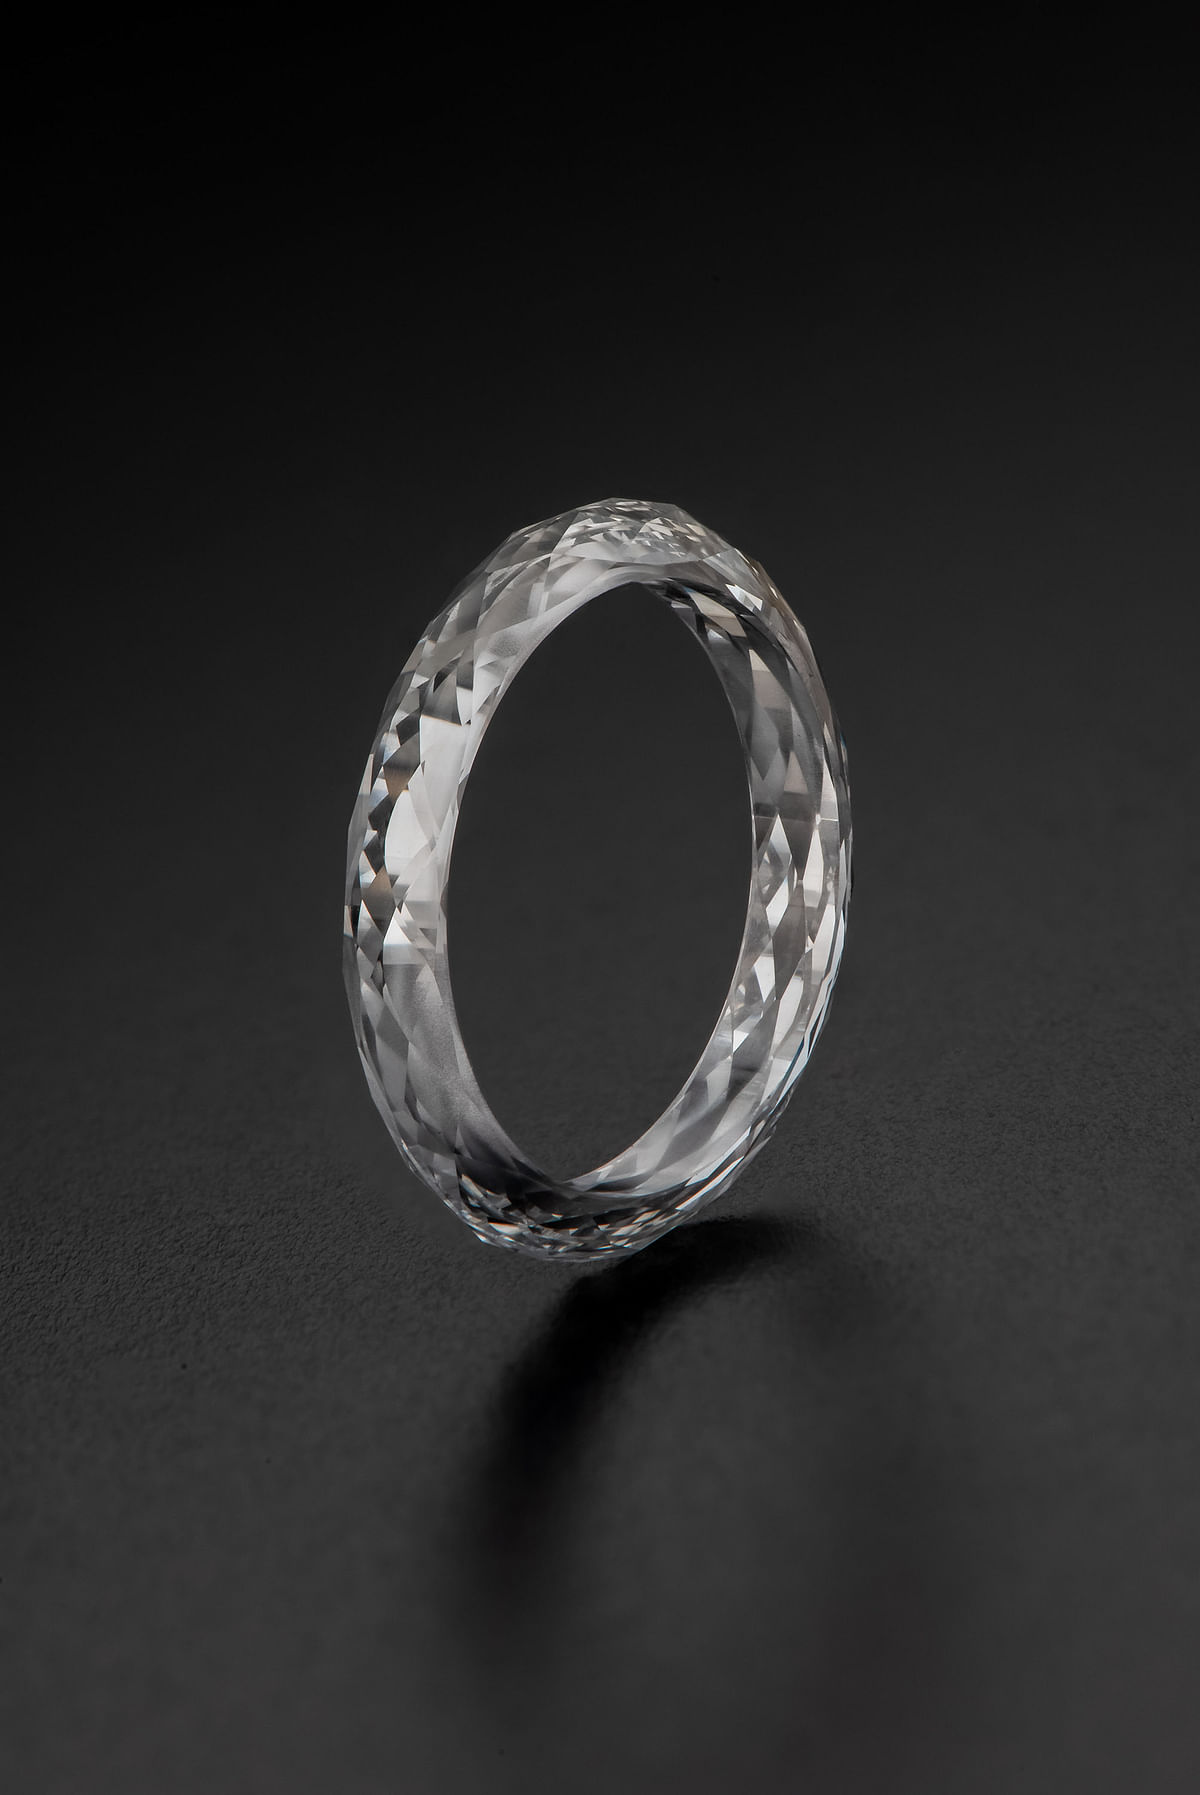 The 4.04 ct ring fashioned from a single-crystal CVD laboratory-grown diamond